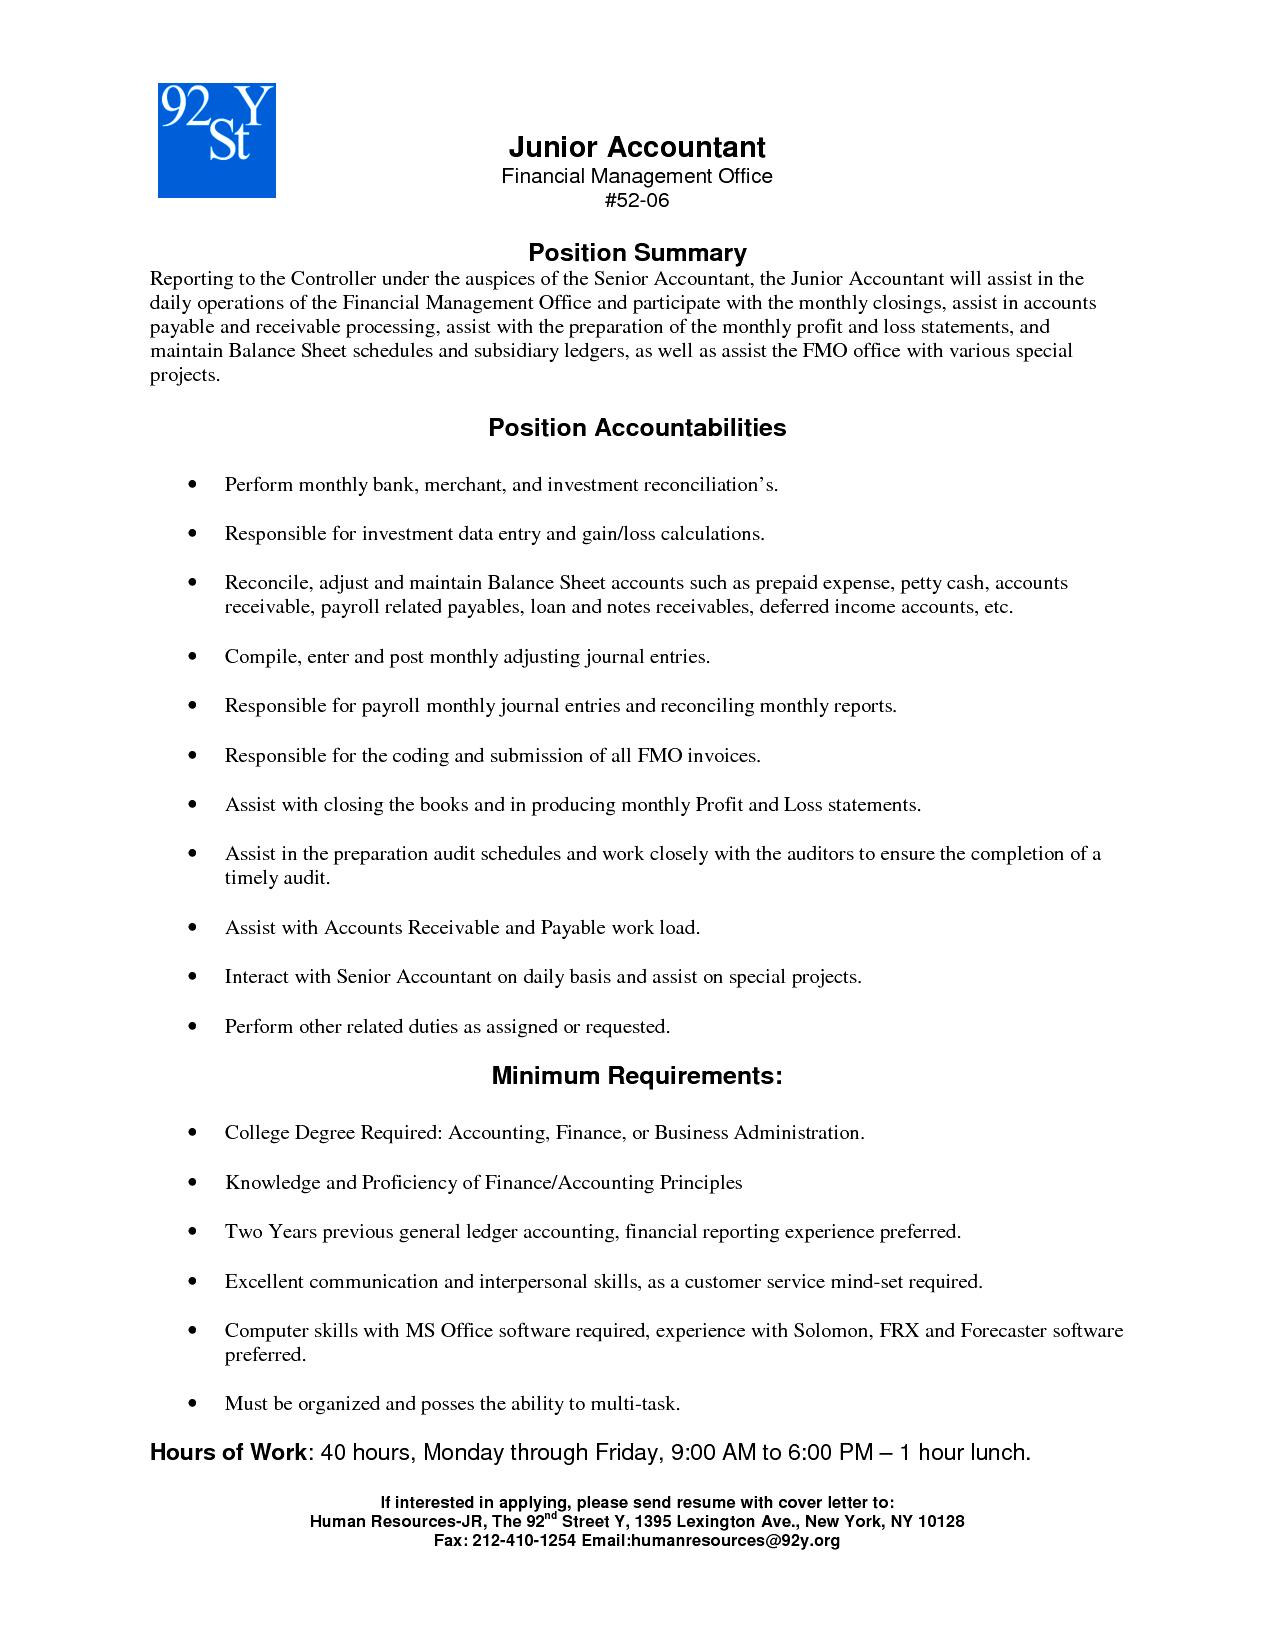 resume examples for 92y